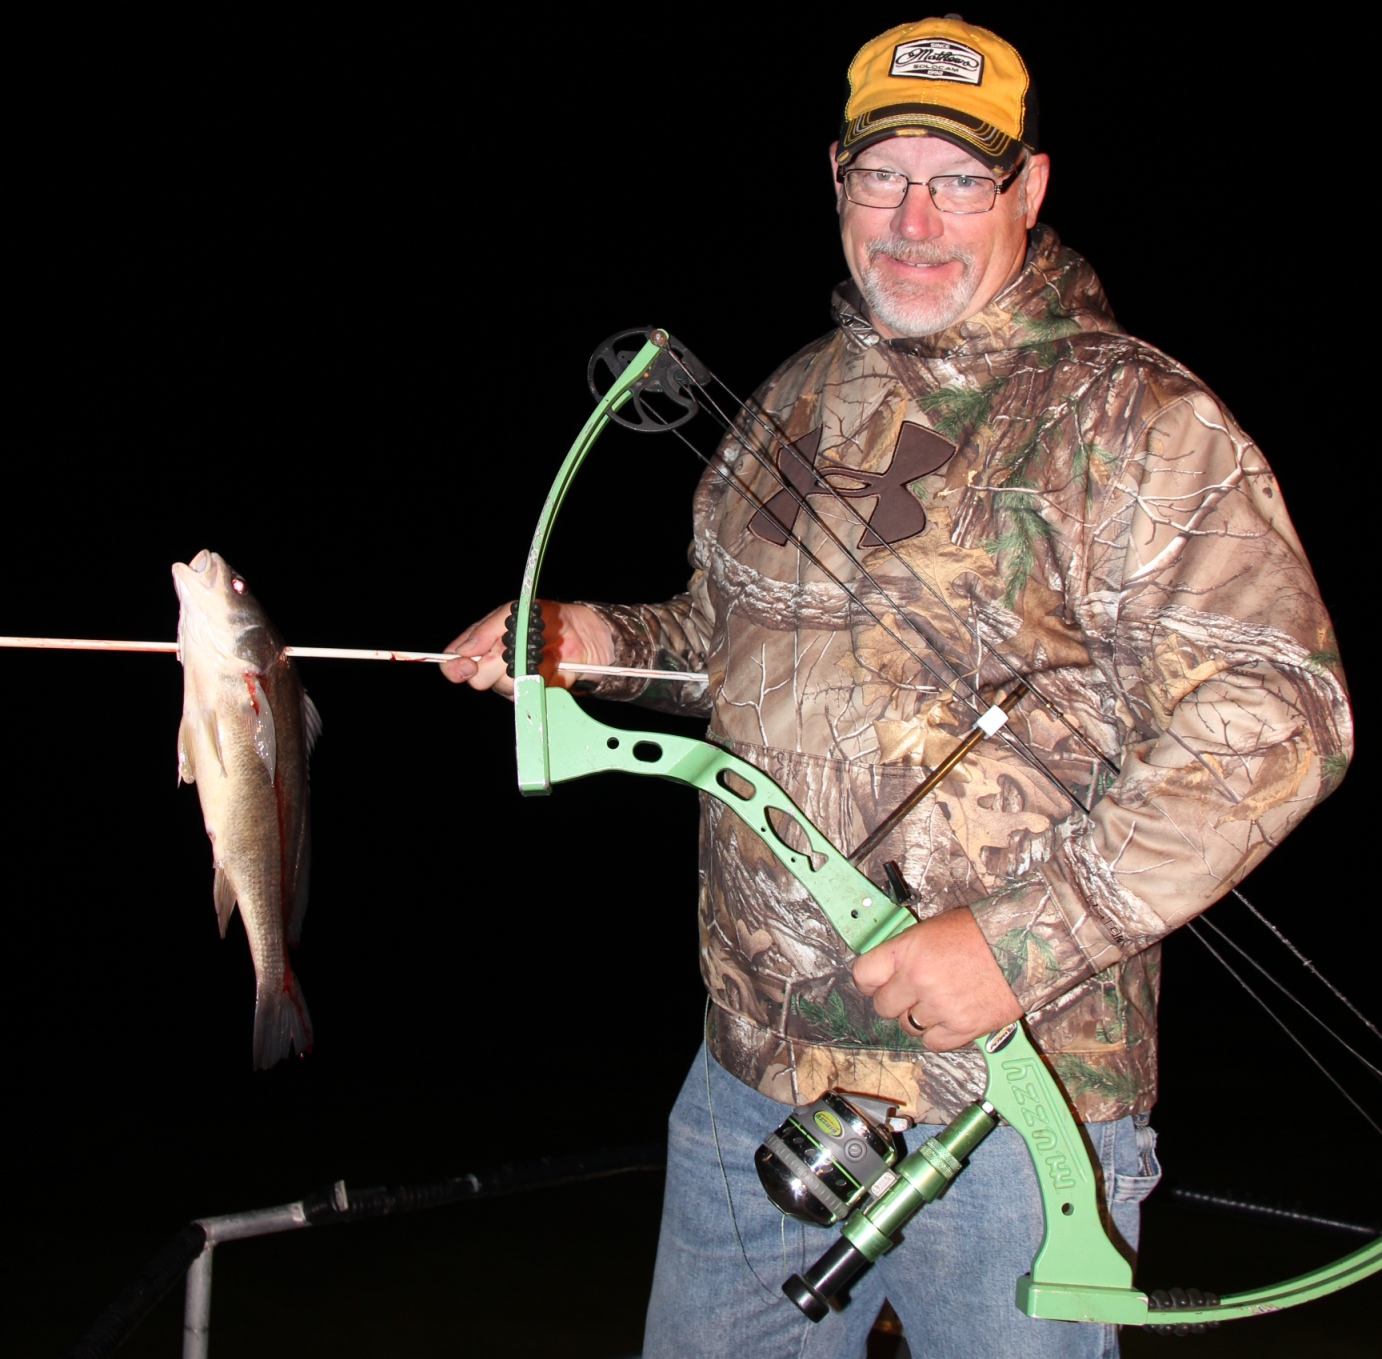 The author has been bowfishing for more than 40 years and has seen a lot of advancements in bowfishing equipment.